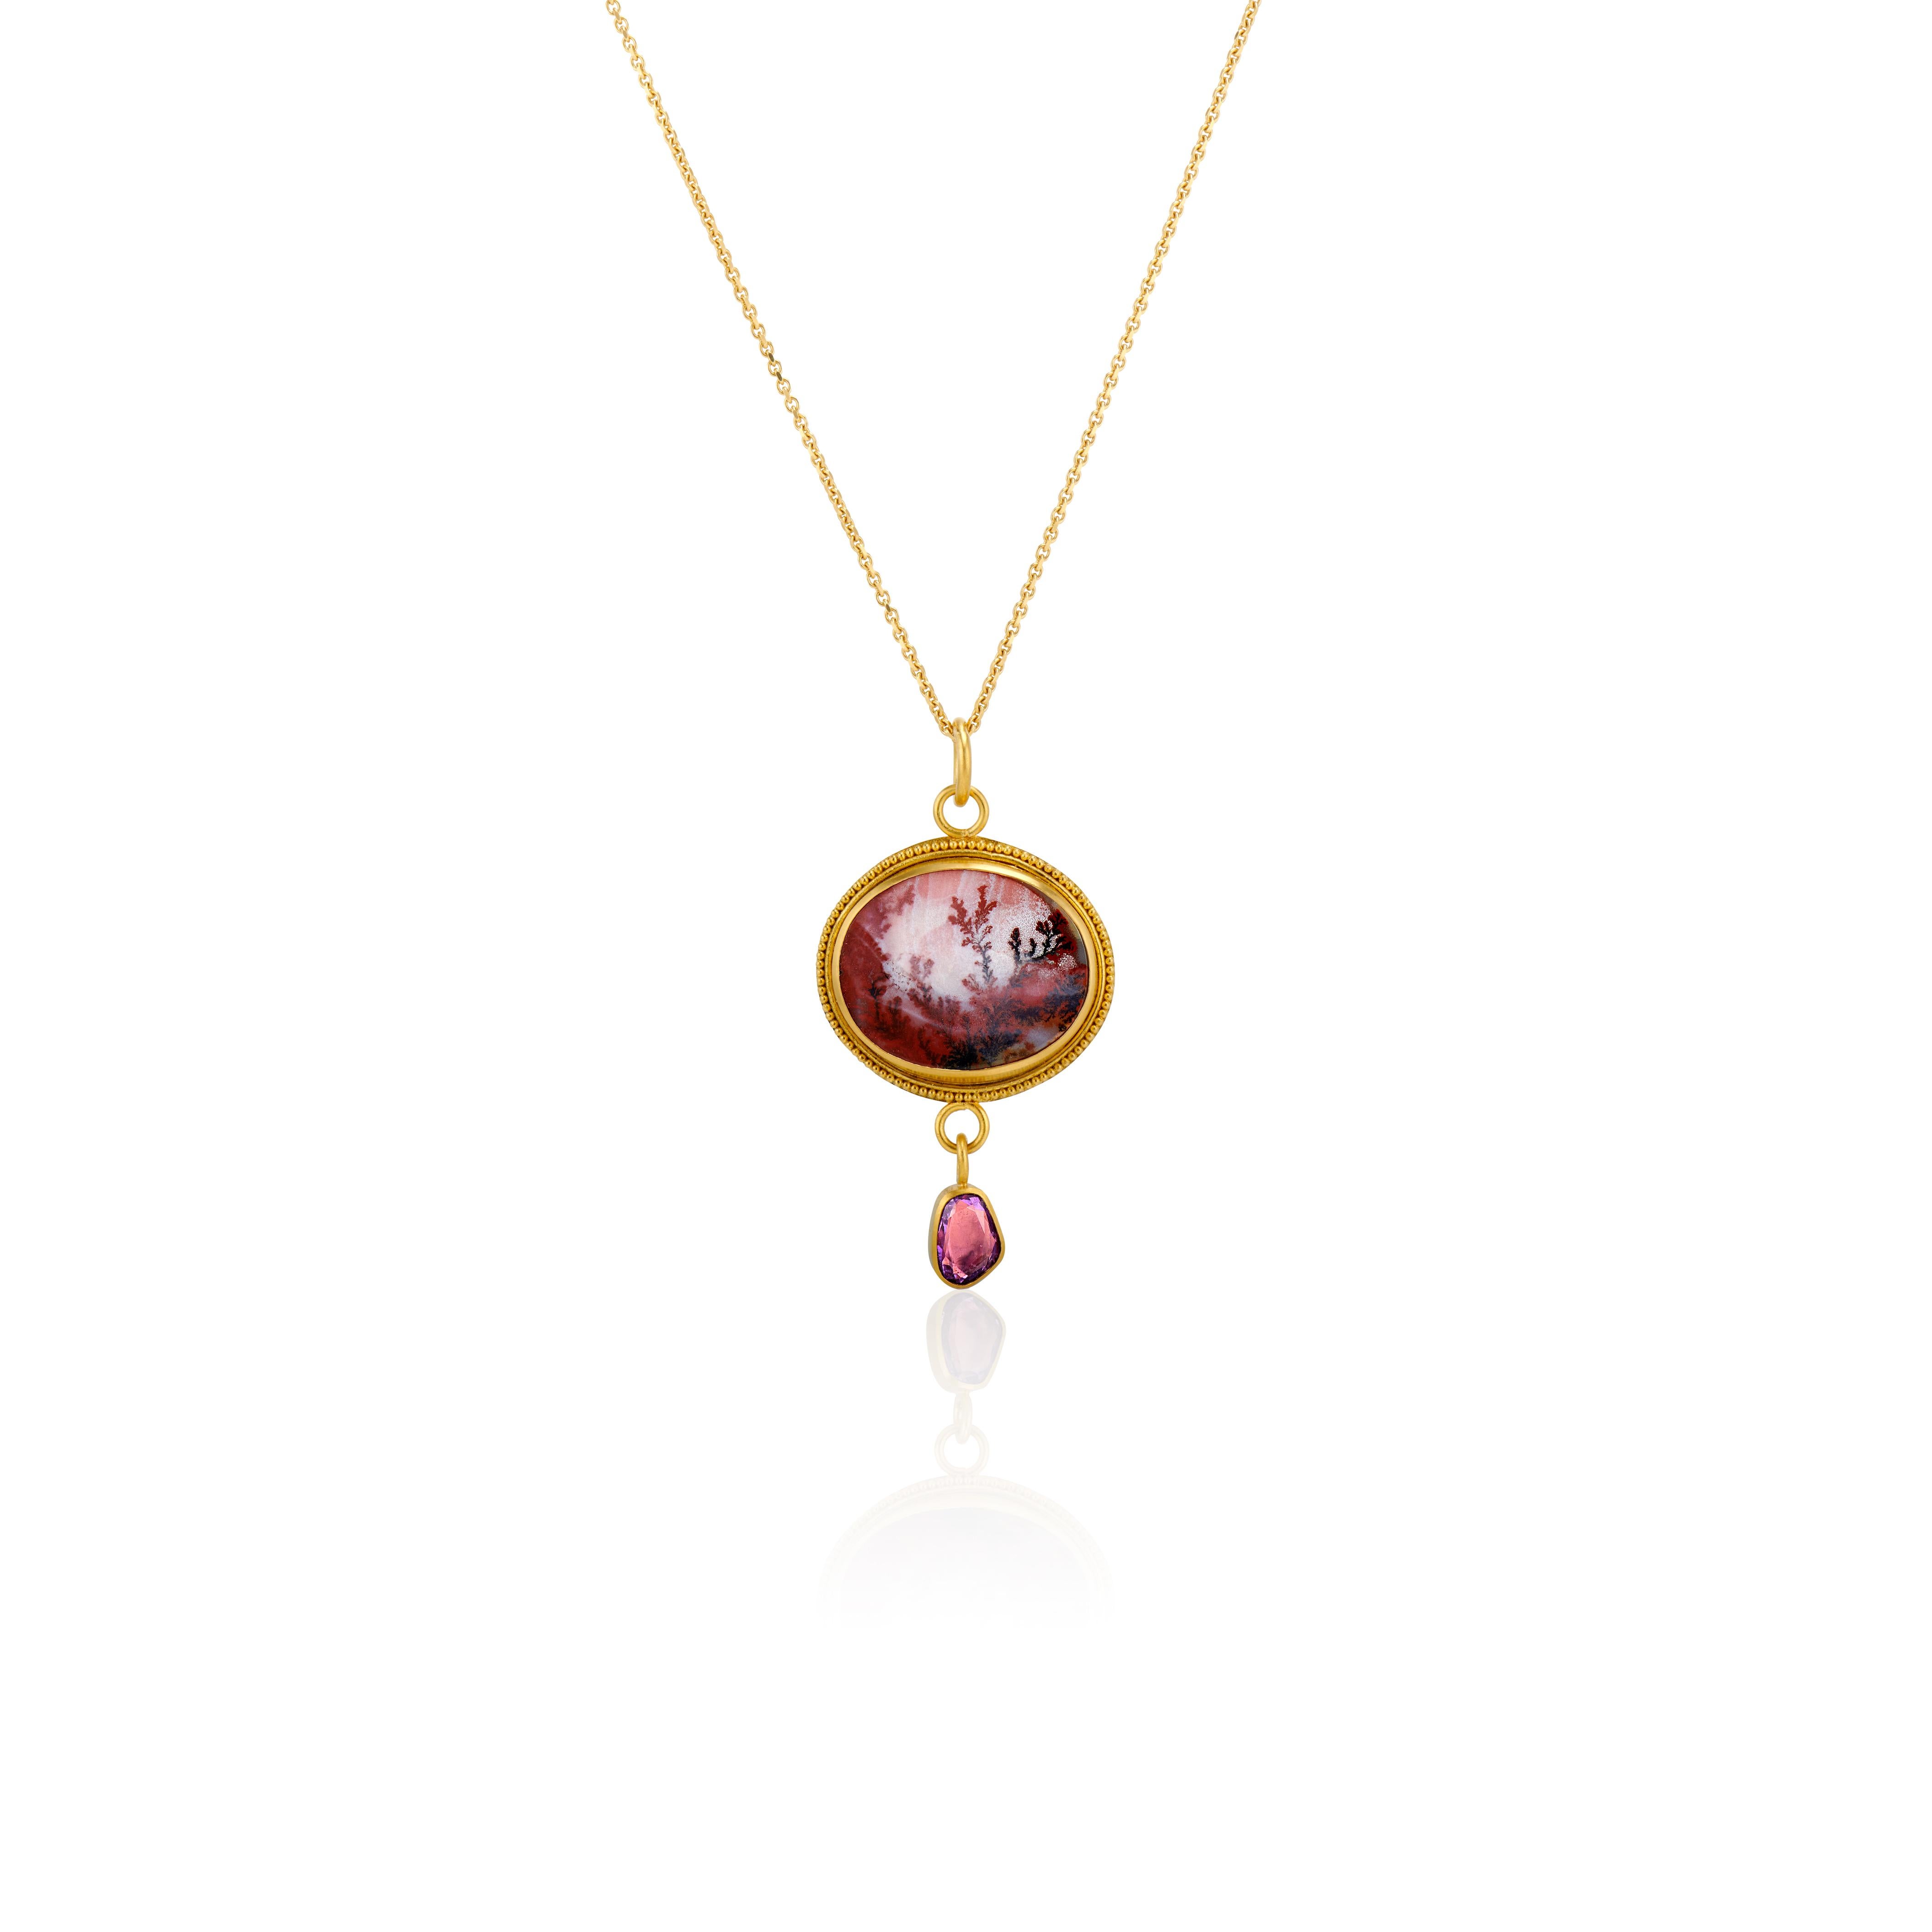 In a mist of dreamy soft violet and plum, this outstanding oval dendritic agate (1.06 x .8 inches) creates a magical world like Shangri-la or Brigadoon.  A bezel of 22 karat yellow gold and a single row of granulation frames the dendritic agate like